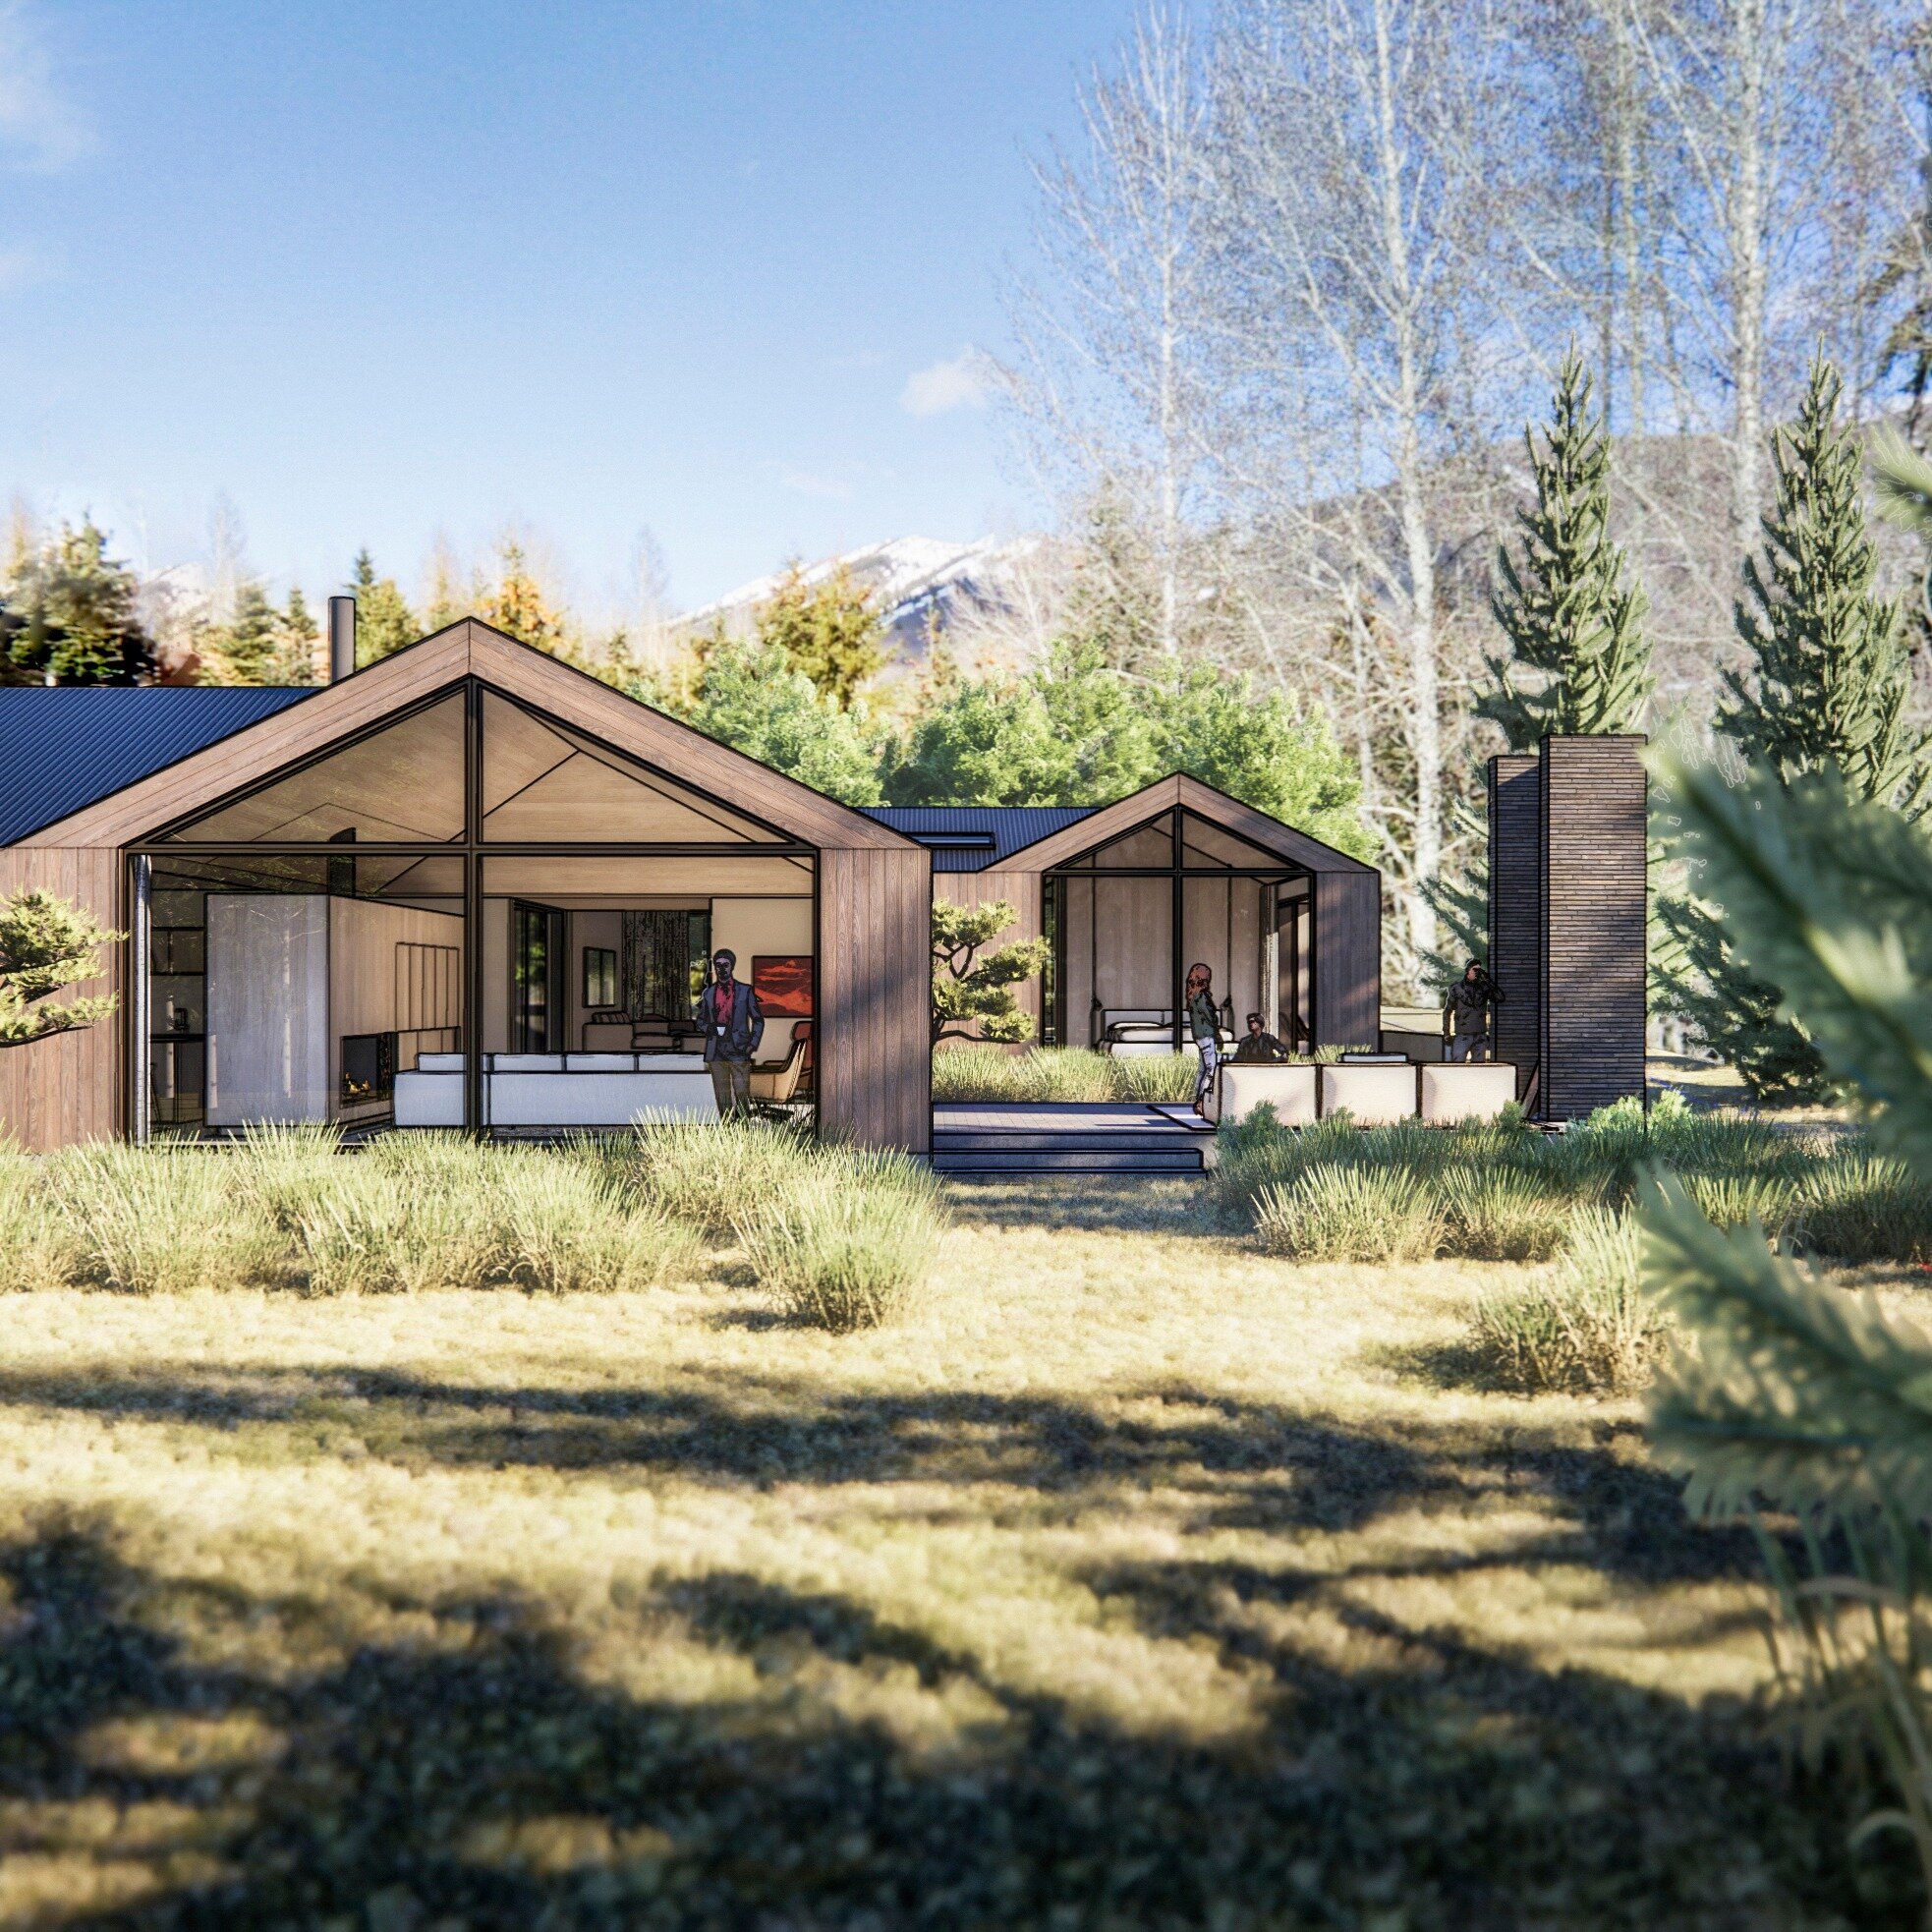 three design proposals for a family home in sun valley #modern #idaho #home